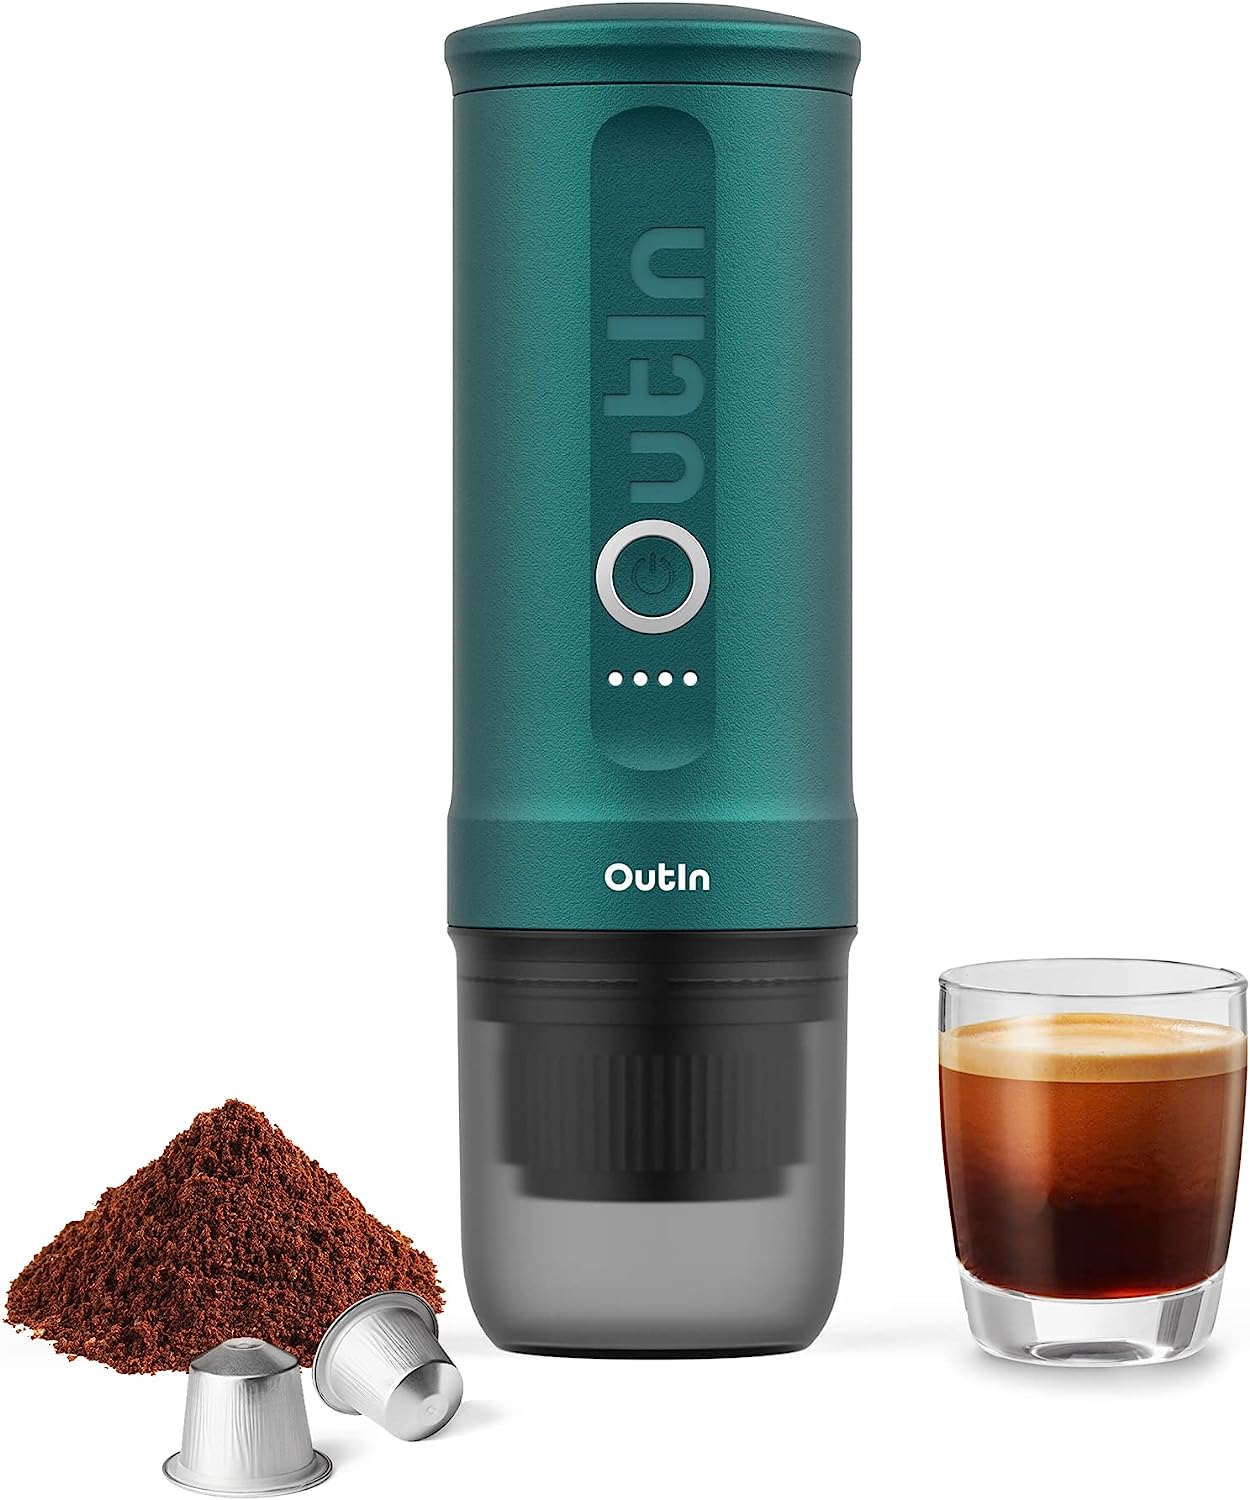 Outin nano Portable Battery Coffee Machine With Self-Heating in 3-4 Minutes, 20 bar 12V 24V Car Espresso Machine with Carry Case, Compatible with NS Capsules & Coffee Powder (Teal)